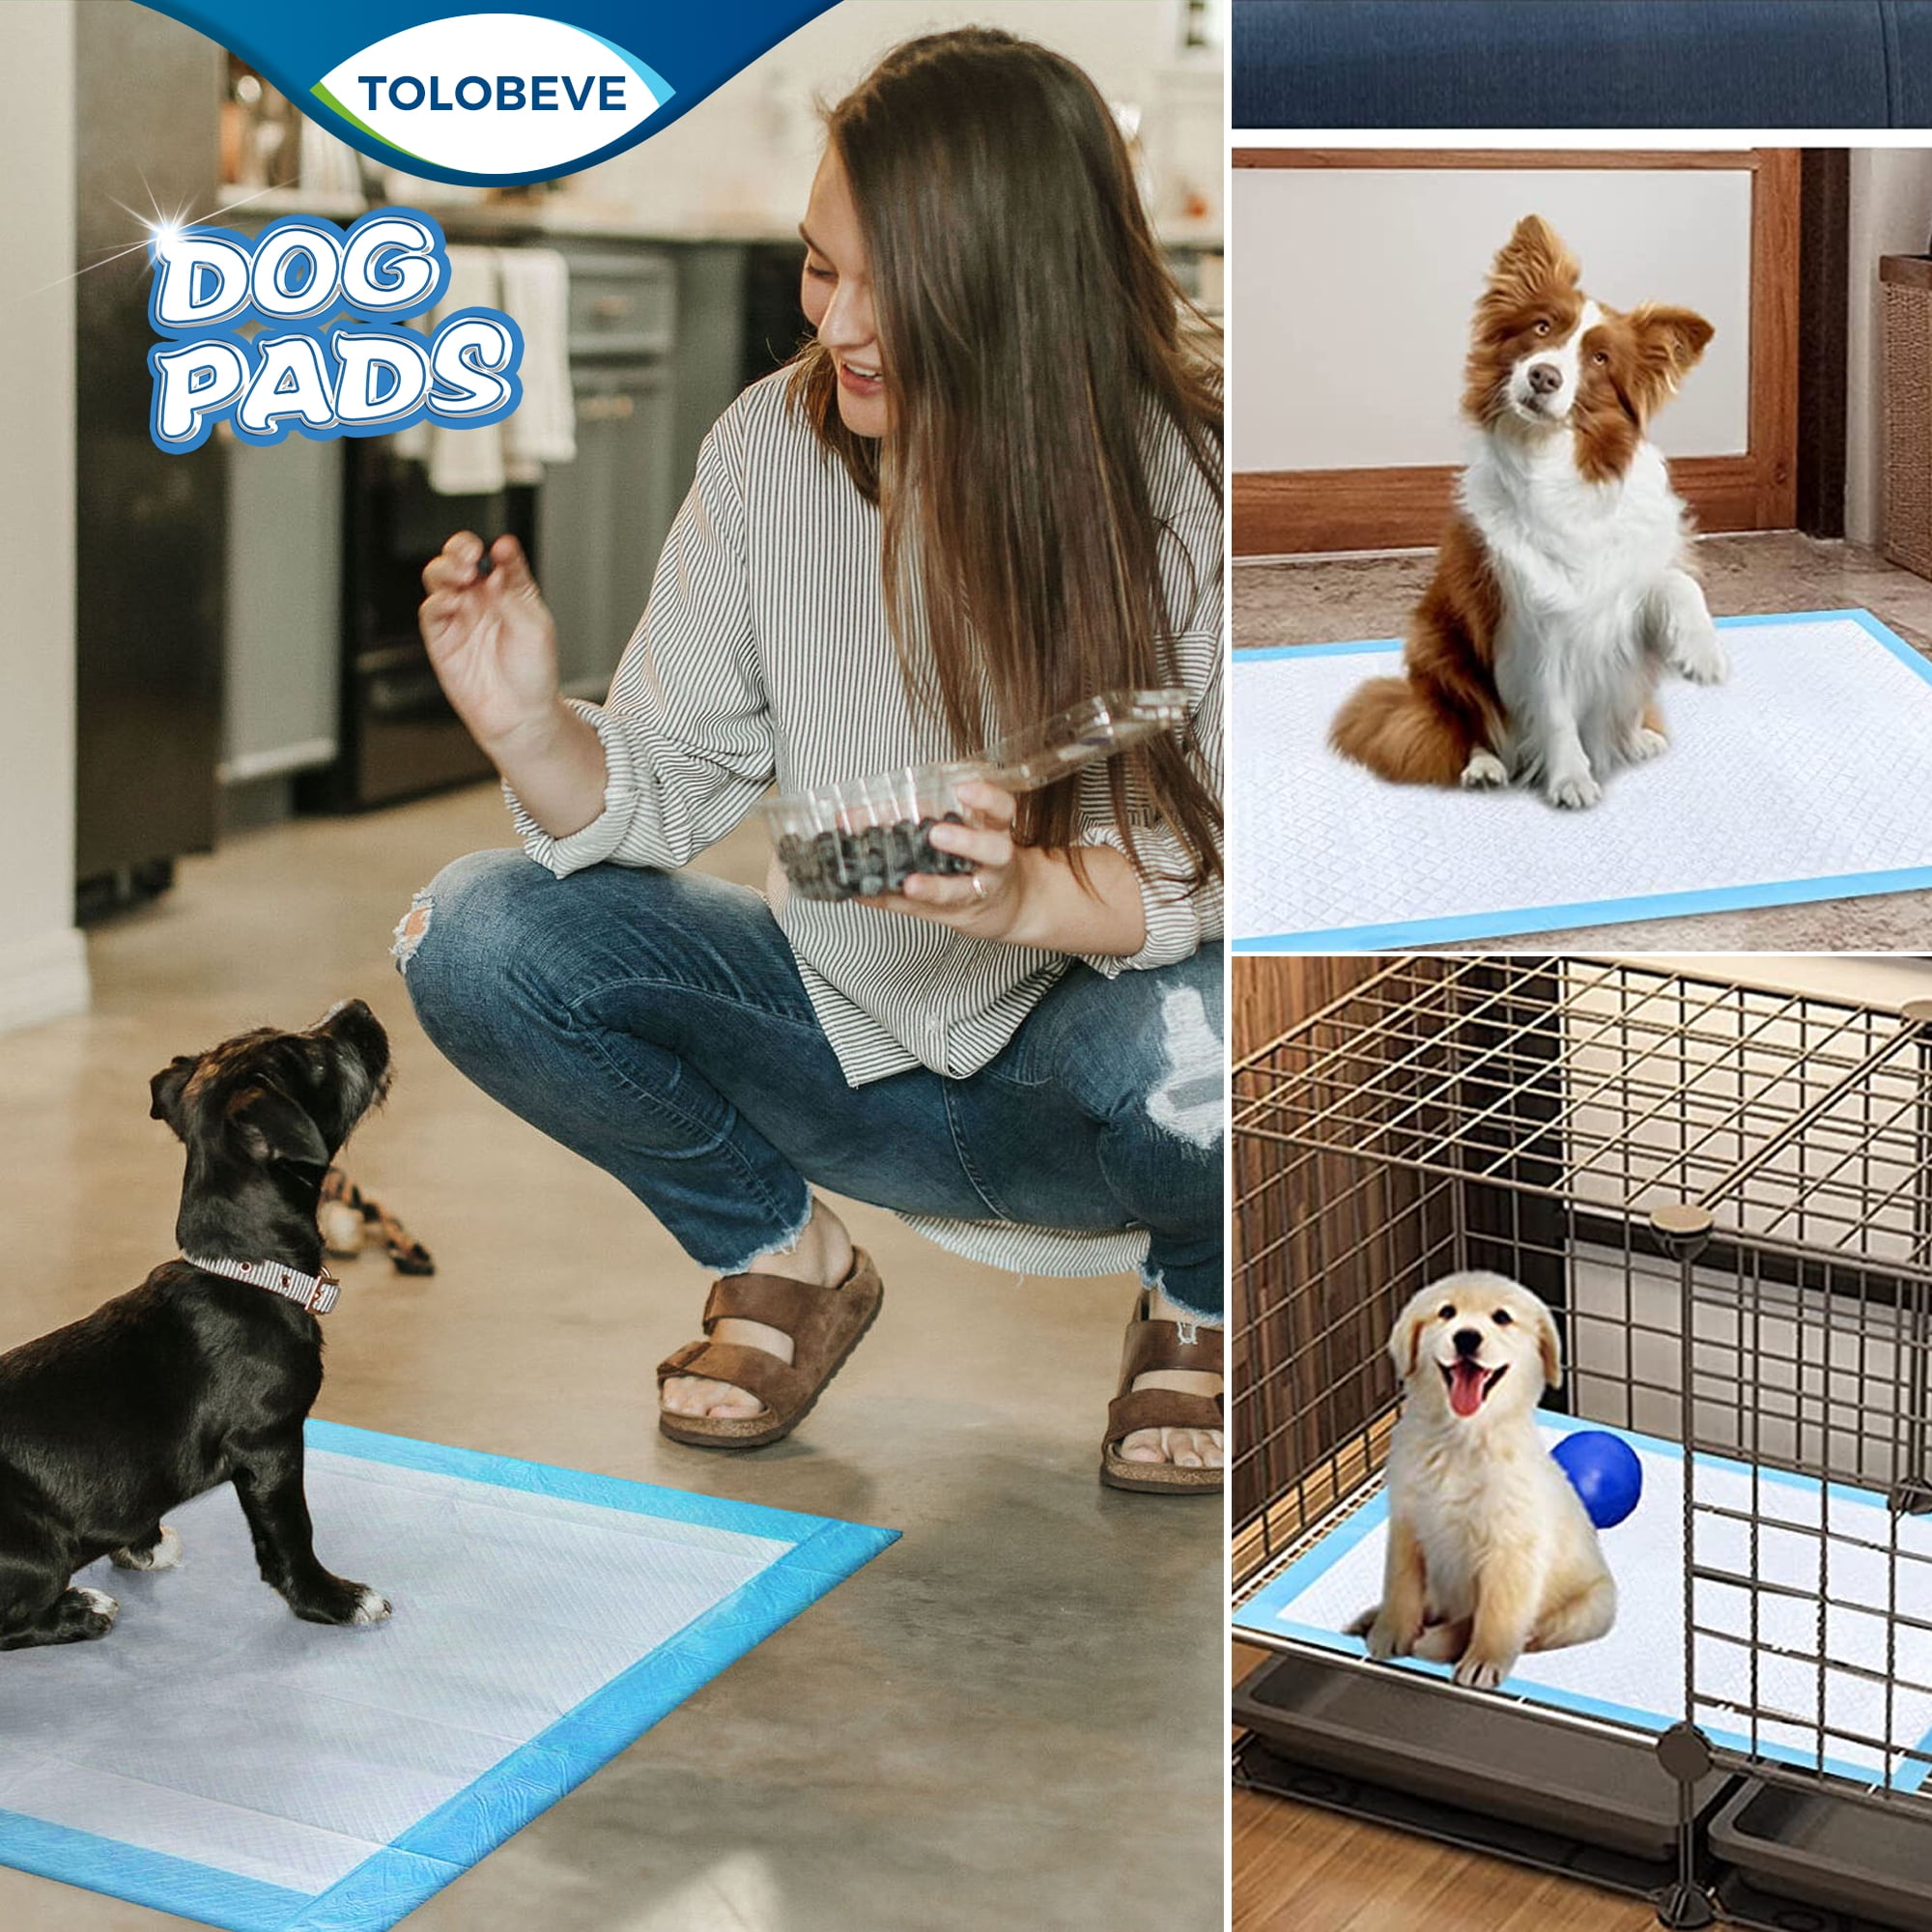 40*50/45*60/50*70/70*100cm Washable Dog Pee Pads Reusable Pee Pet Pads  Waterproof Puppy Pad Pet Dog Pee Pads for Training Travel